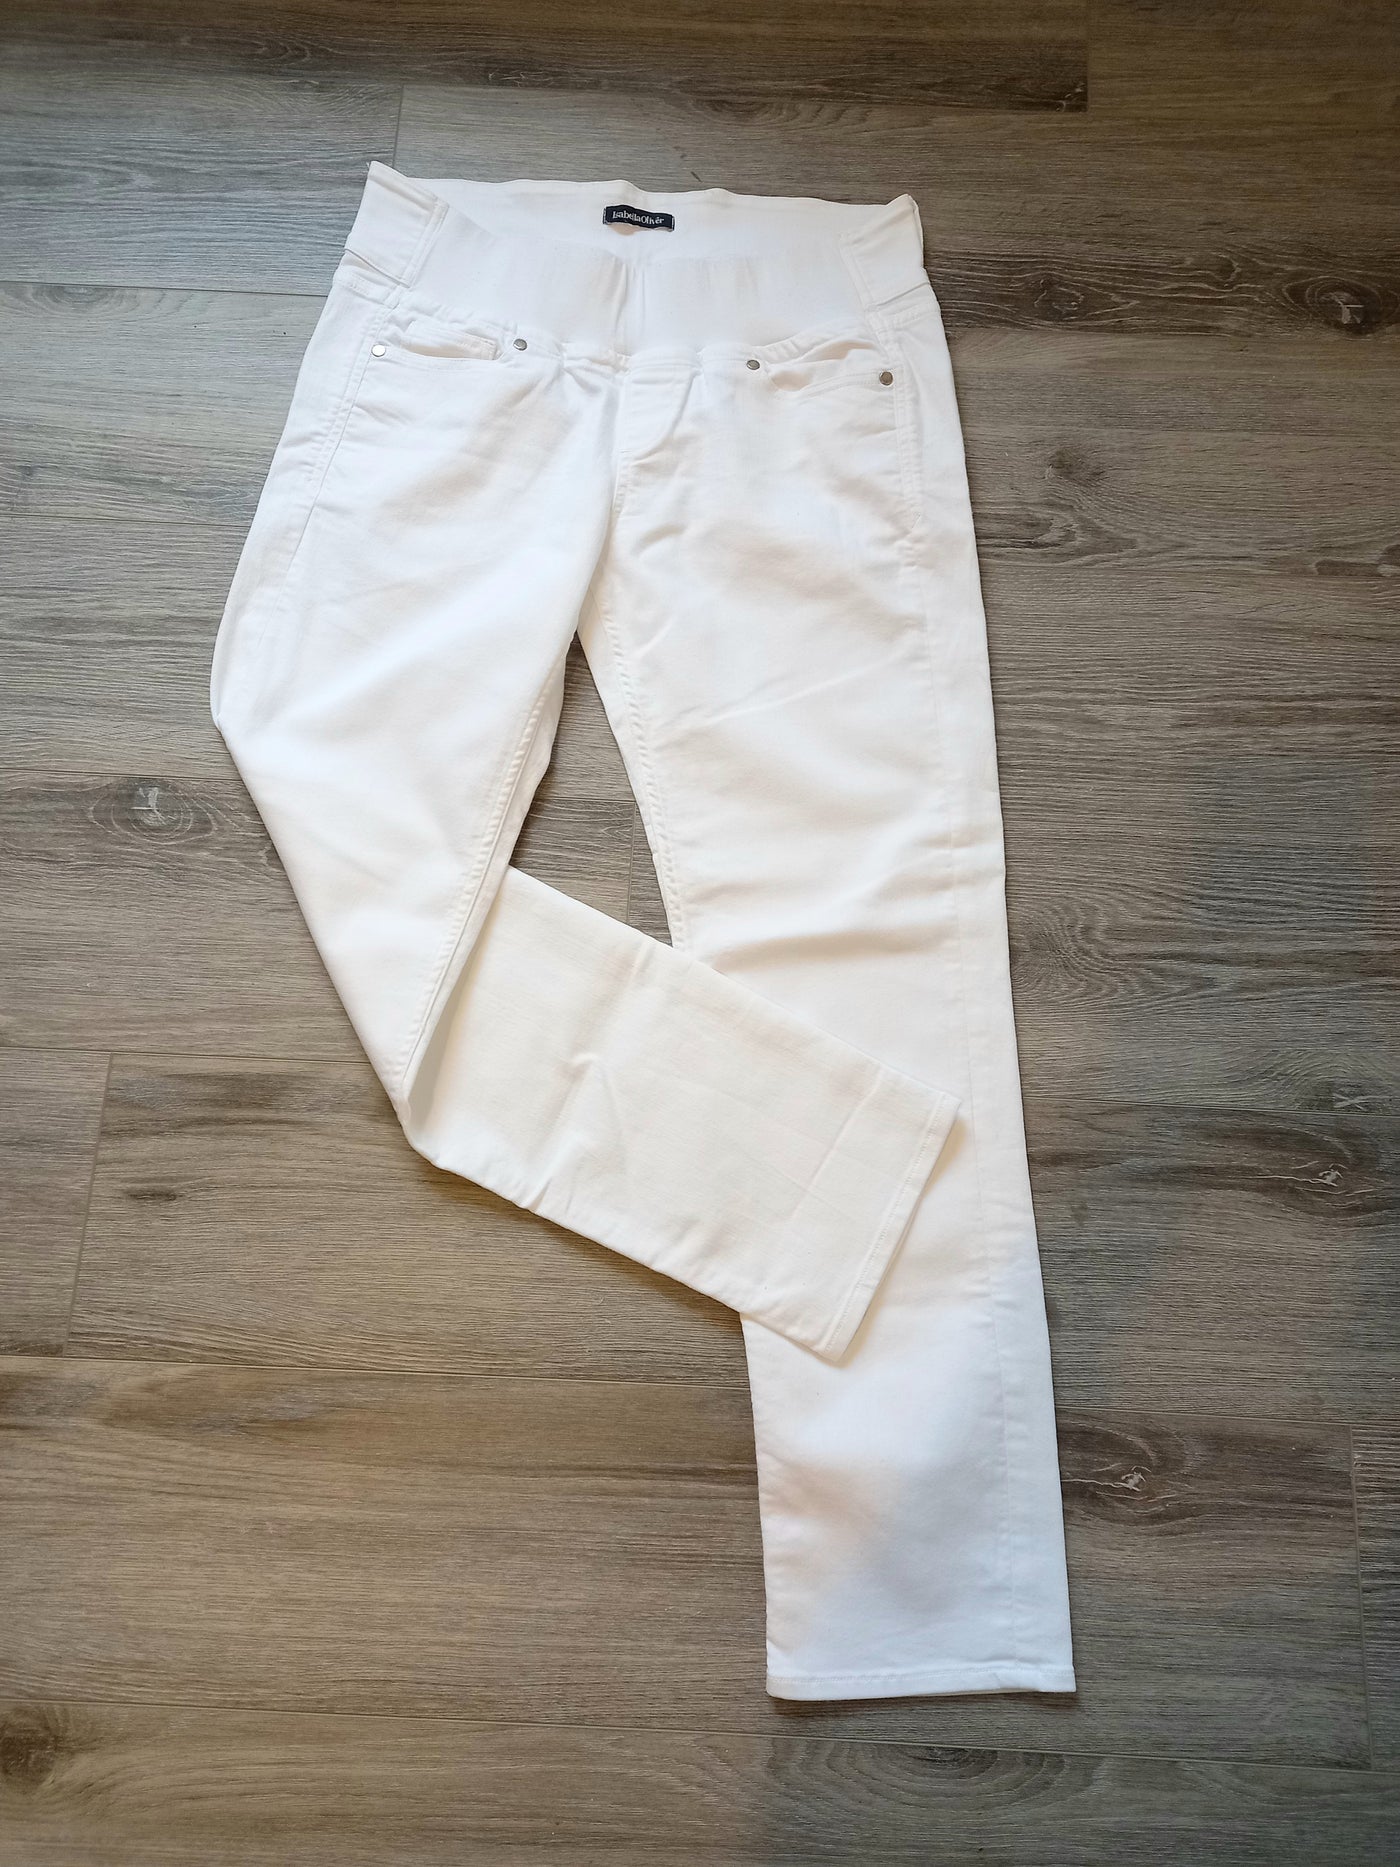 Isabella Oliver White Underbump Jeans - Size 27L  (Approx UK 10)